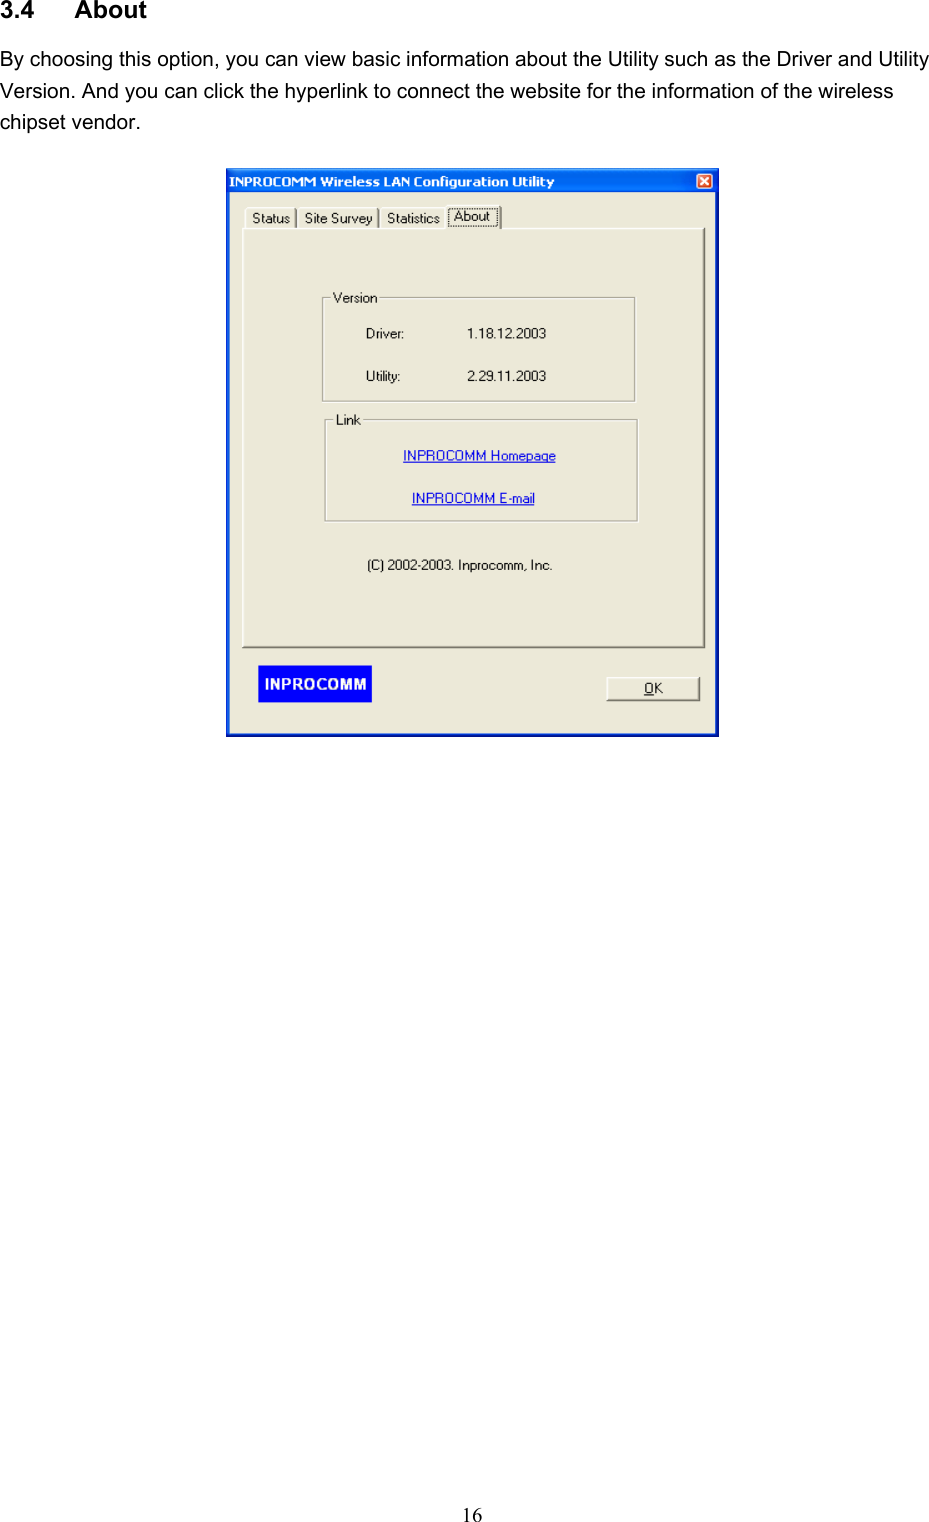  16 3.4 About By choosing this option, you can view basic information about the Utility such as the Driver and Utility Version. And you can click the hyperlink to connect the website for the information of the wireless chipset vendor.   